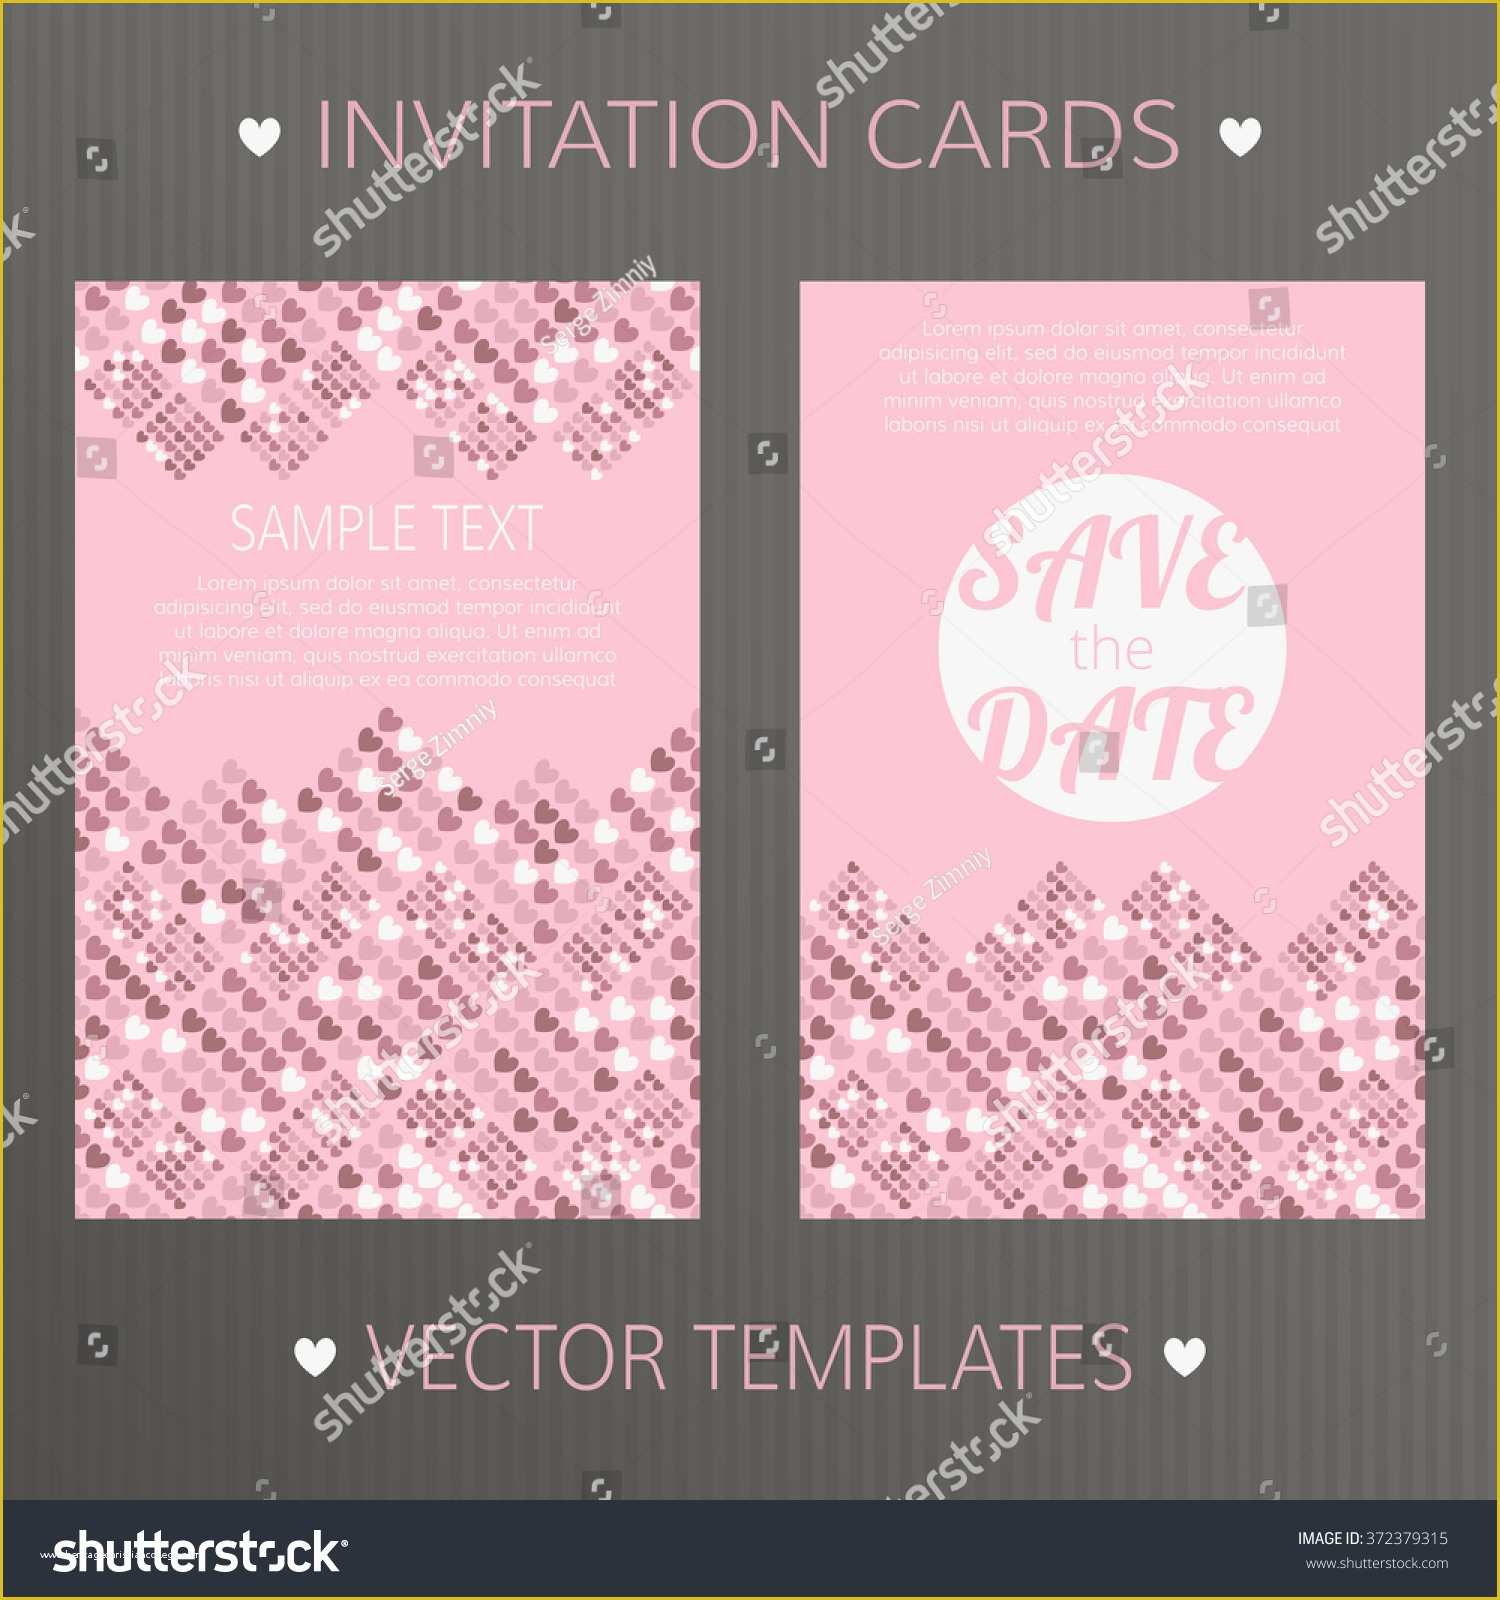 Birthday Party Save the Date Templates Free Of Vector Templates Save Date Birthday Wedding Stock Vector